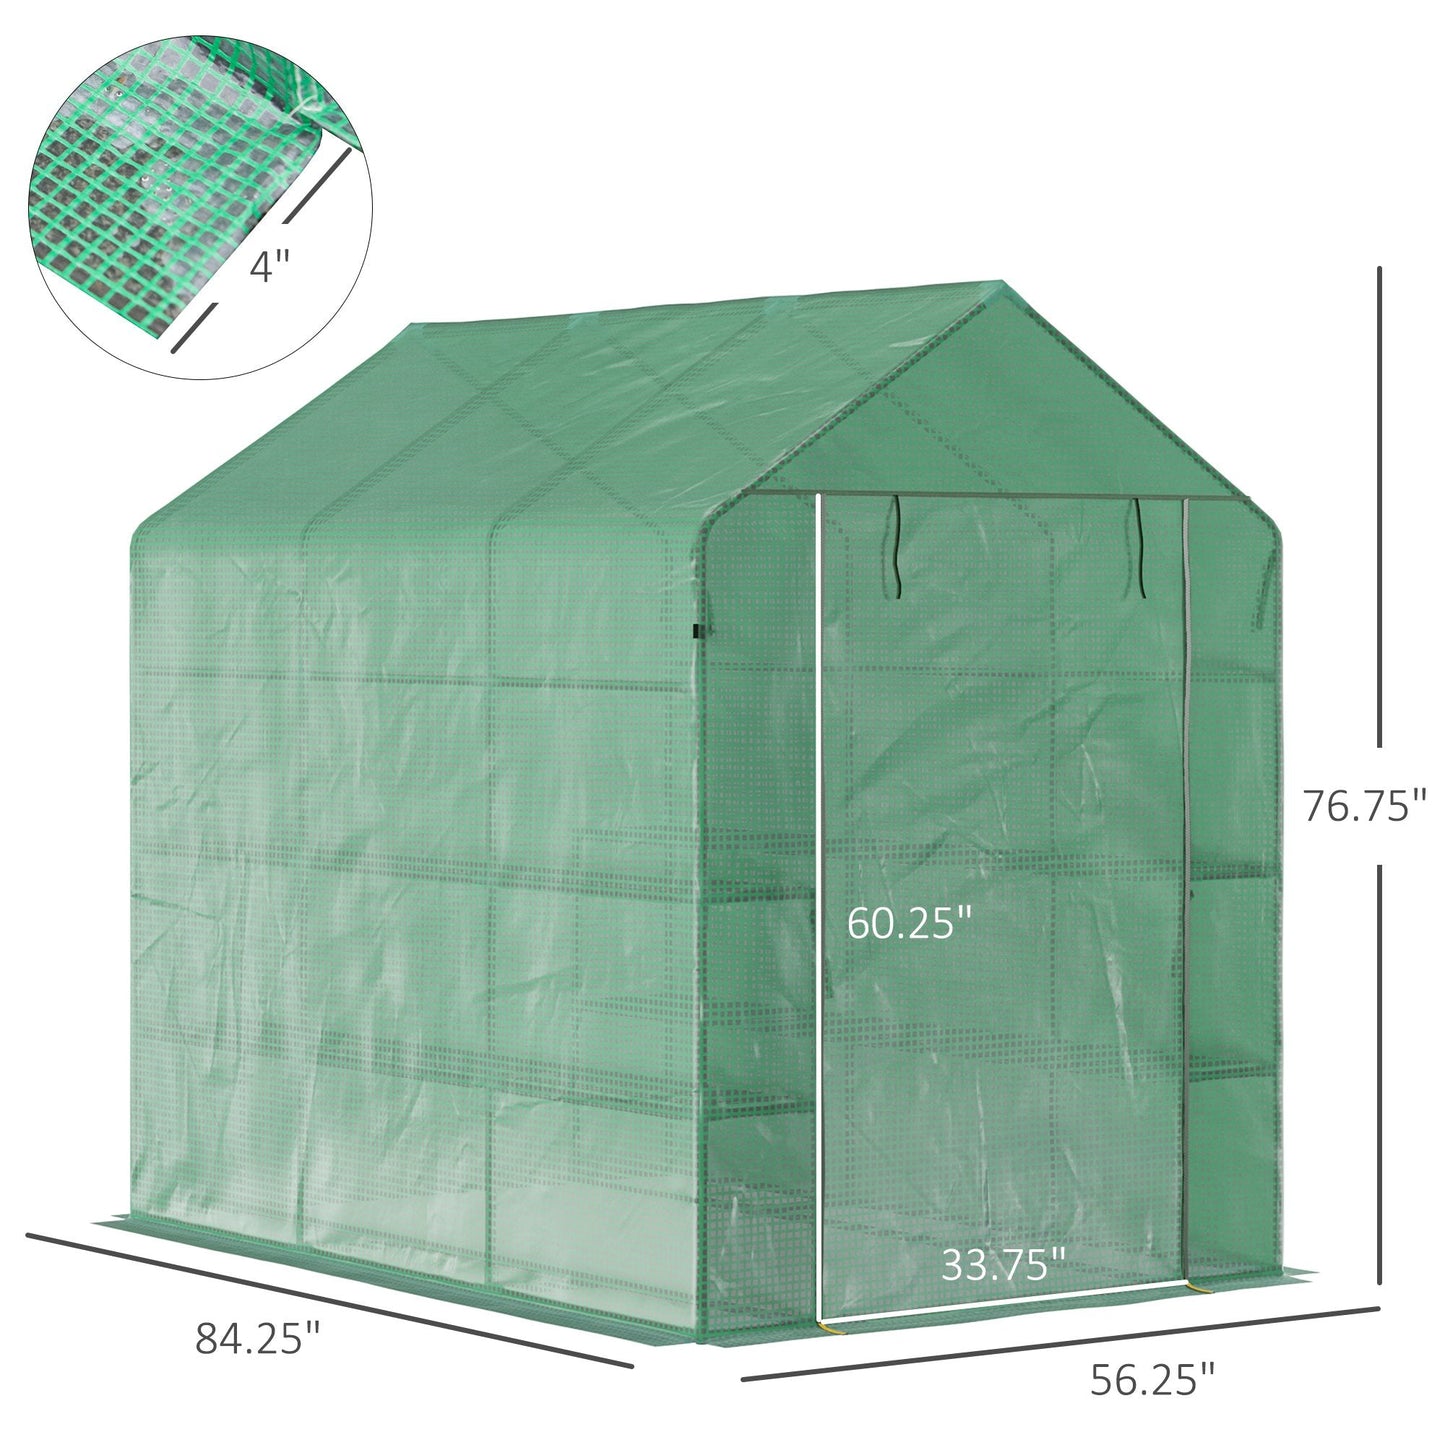 Miscellaneous-7' x 5' x 6' Walk-in Greenhouse PE Cover, 3-Tier Shelves, Steel Frame Hot house, Roll-Up Zipper Door for Flowers, Vegetables, Green - Outdoor Style Company